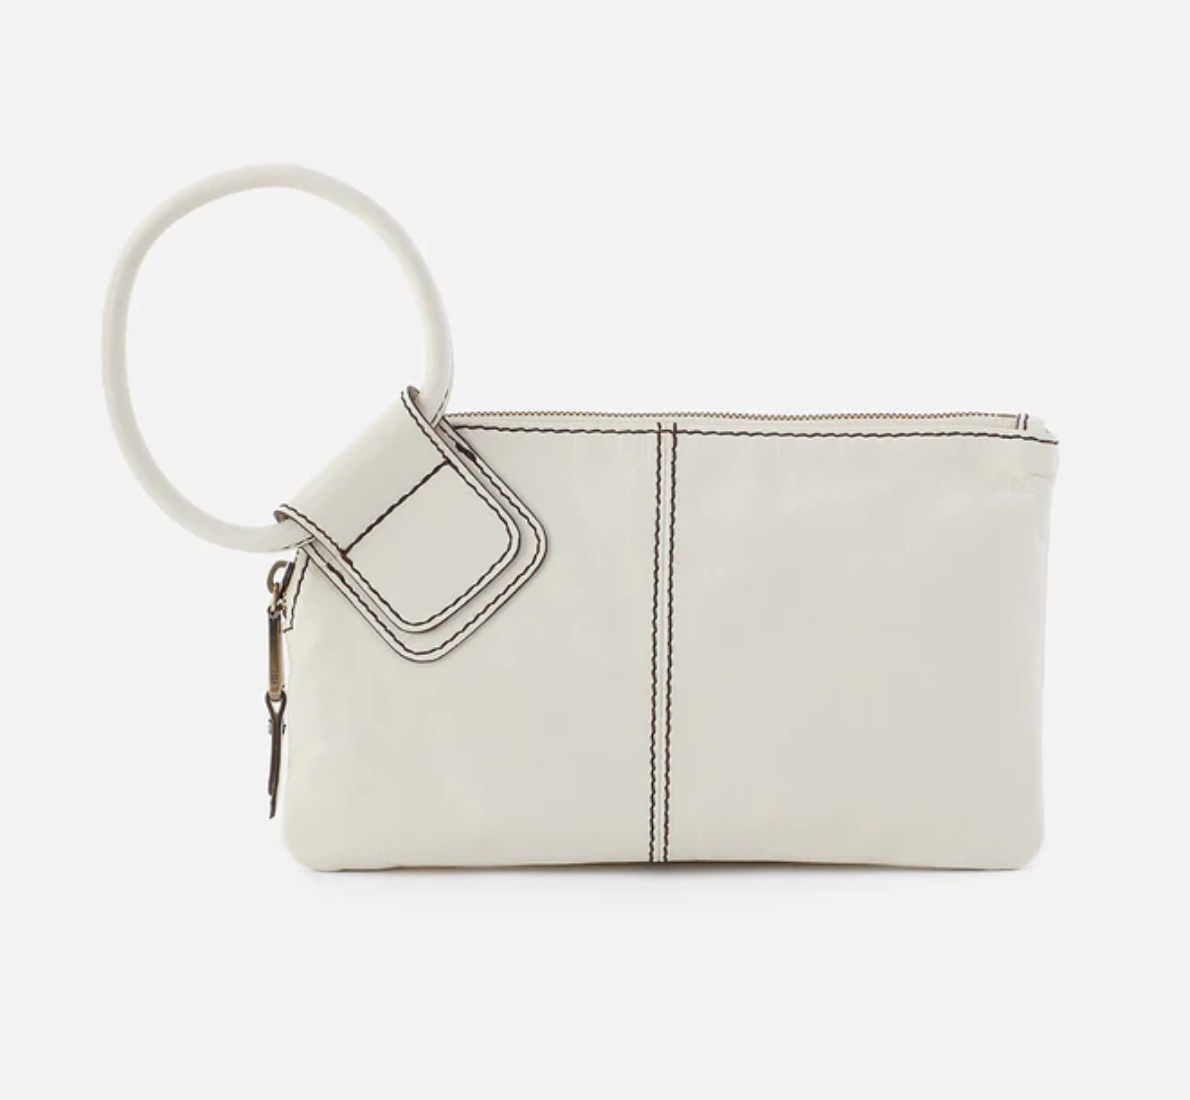 Sable Wristlet by HOBO in Latte - The Street Boutique 